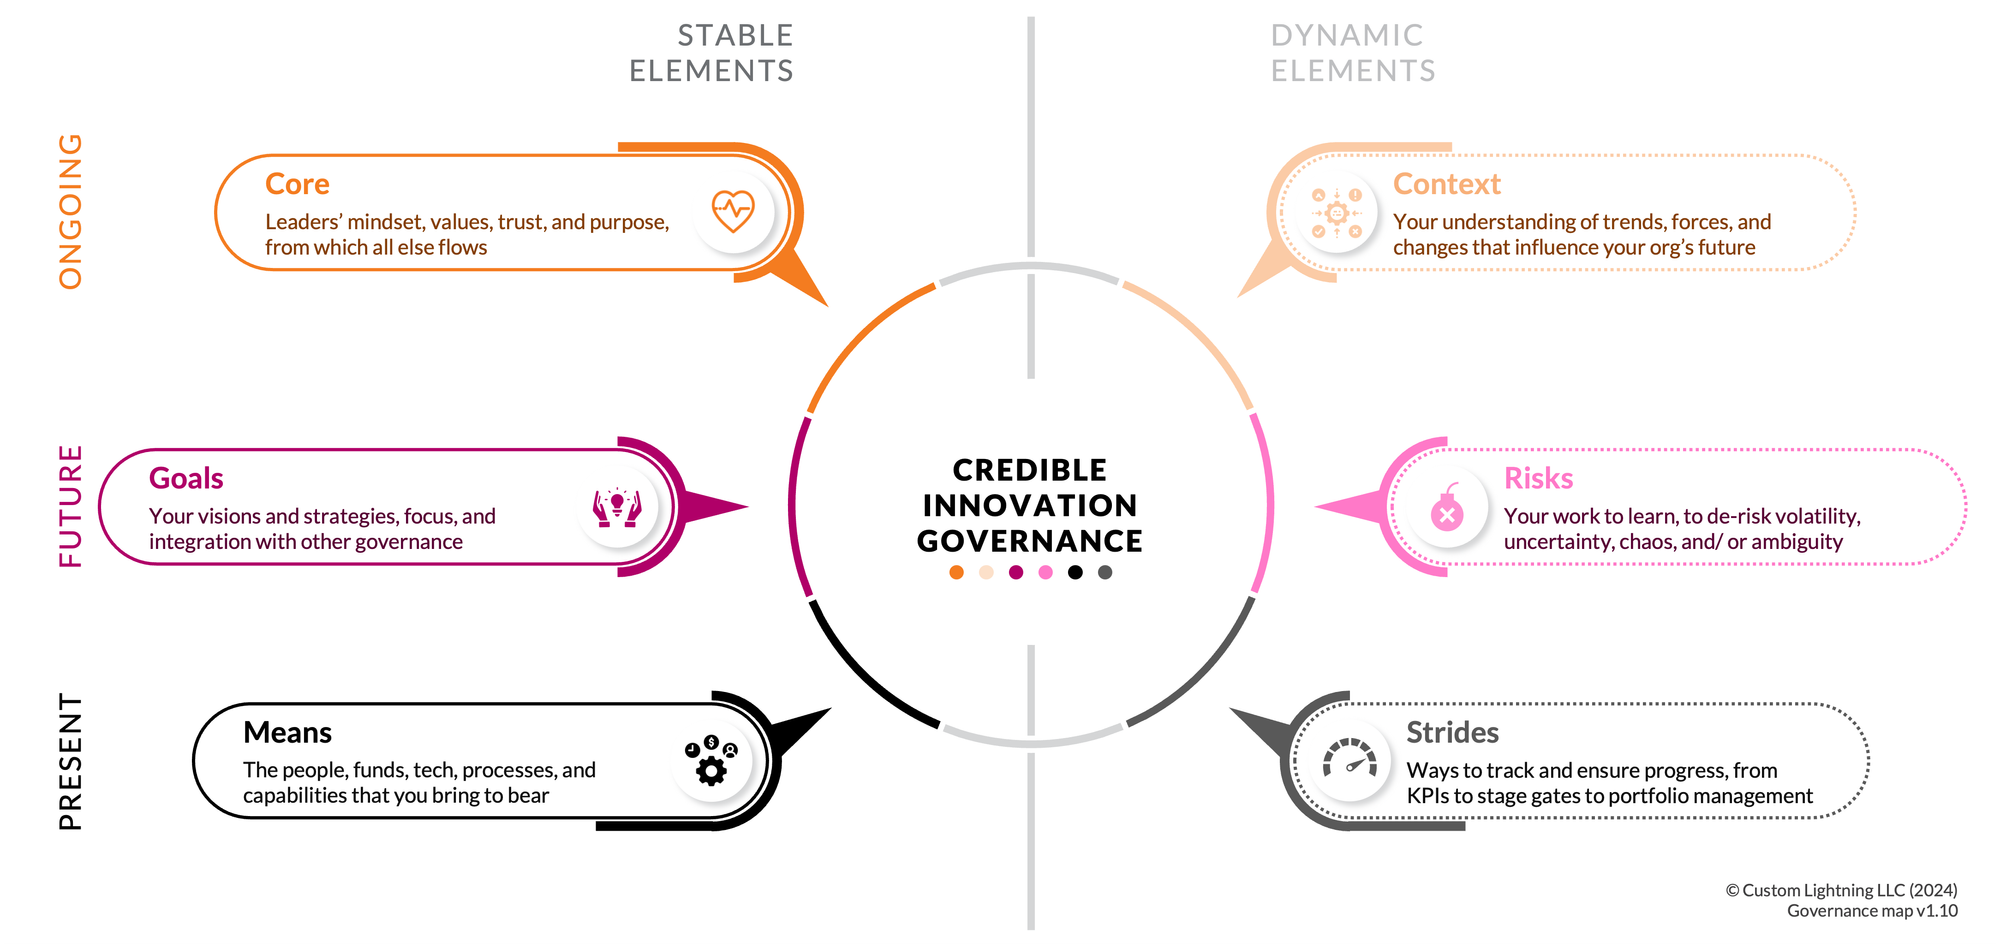 A colorful framework of 6 "credible innovation governance" topics around a central circle, with descriptions